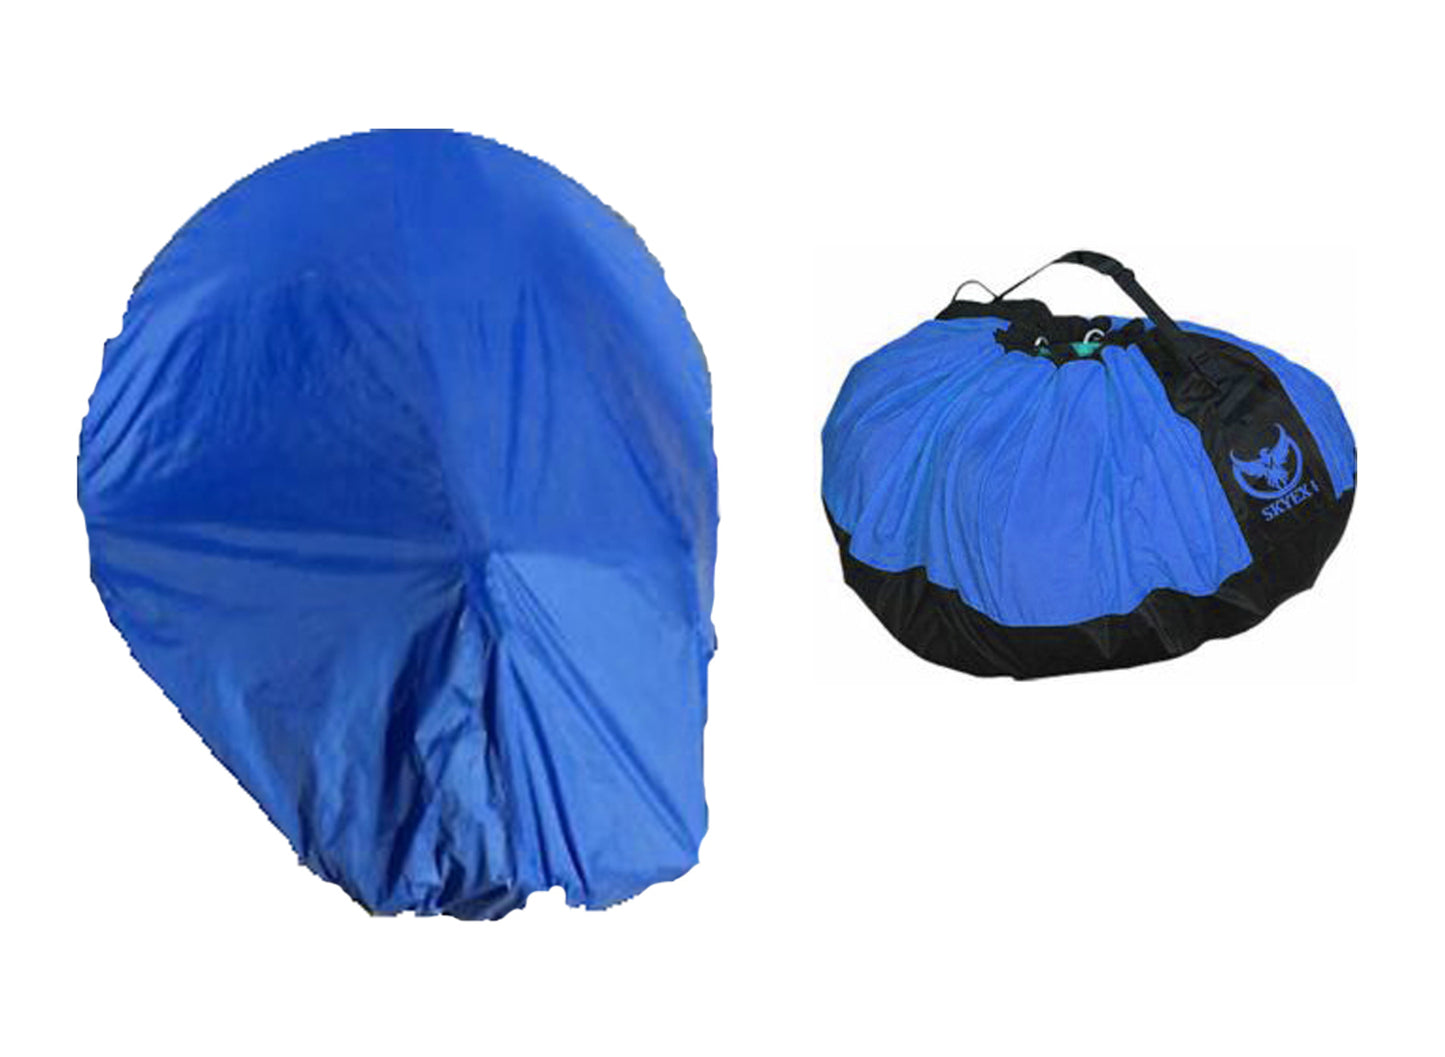 Paragliding Quick Bag | Best Paramotor Dust Cover-0004 | Skyexsuits